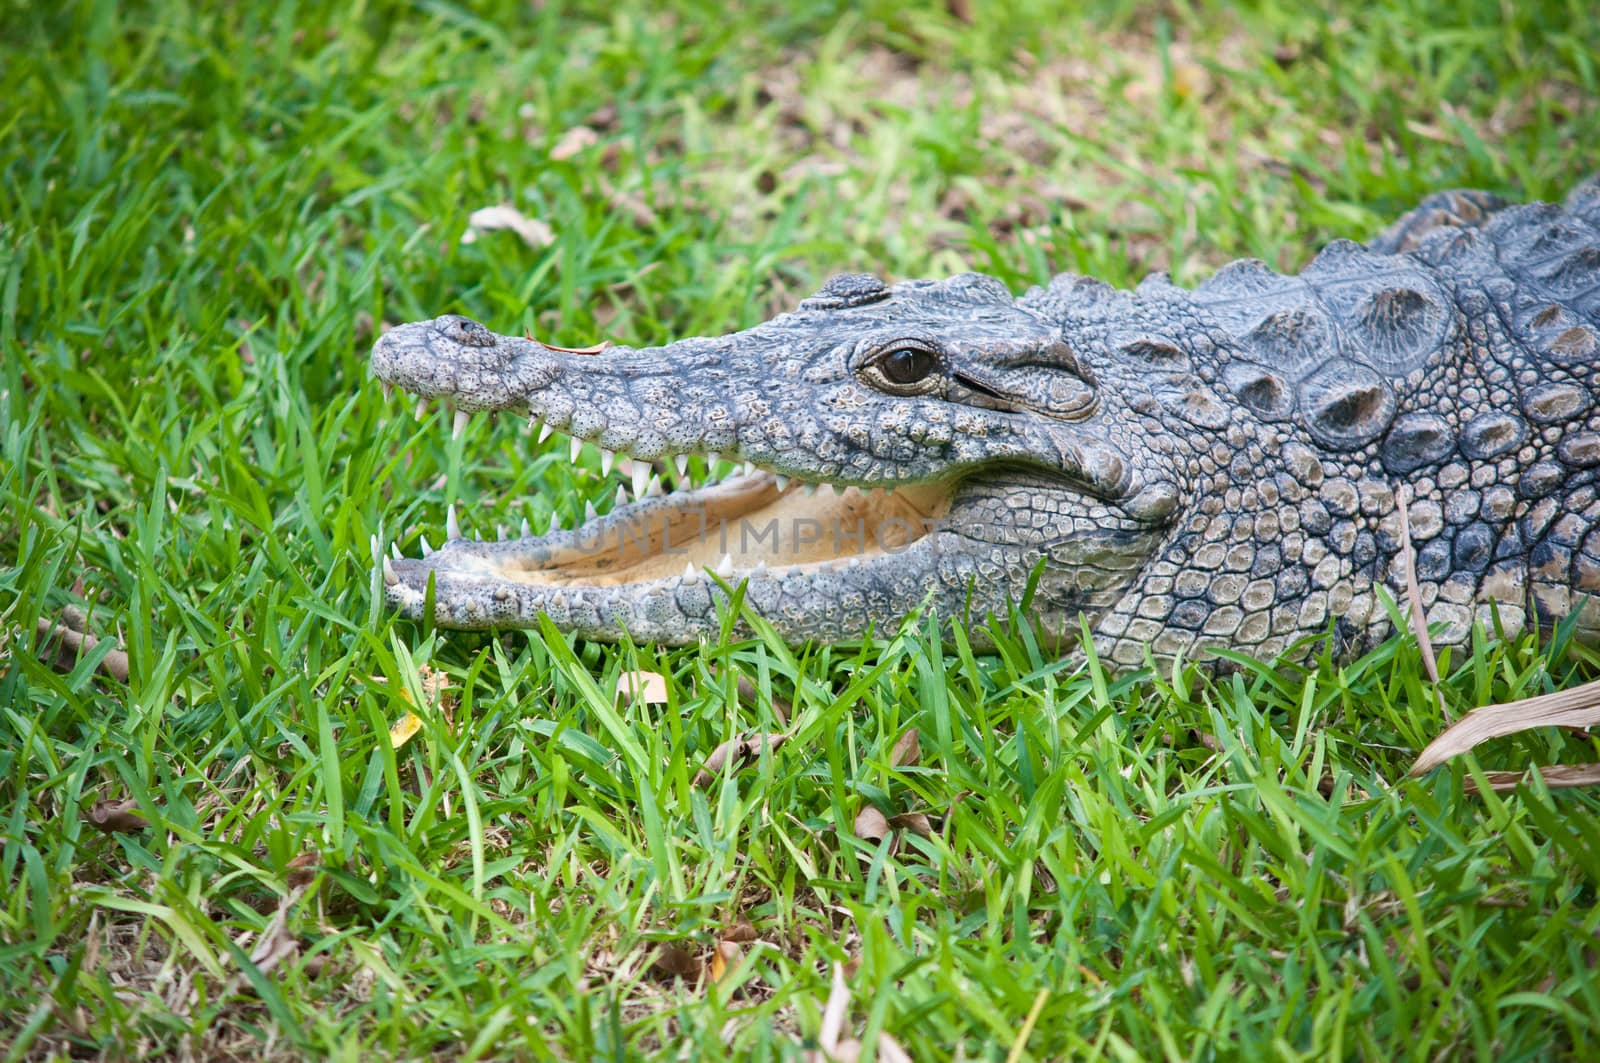 Portrait of a crocodile on a grass background close-up.